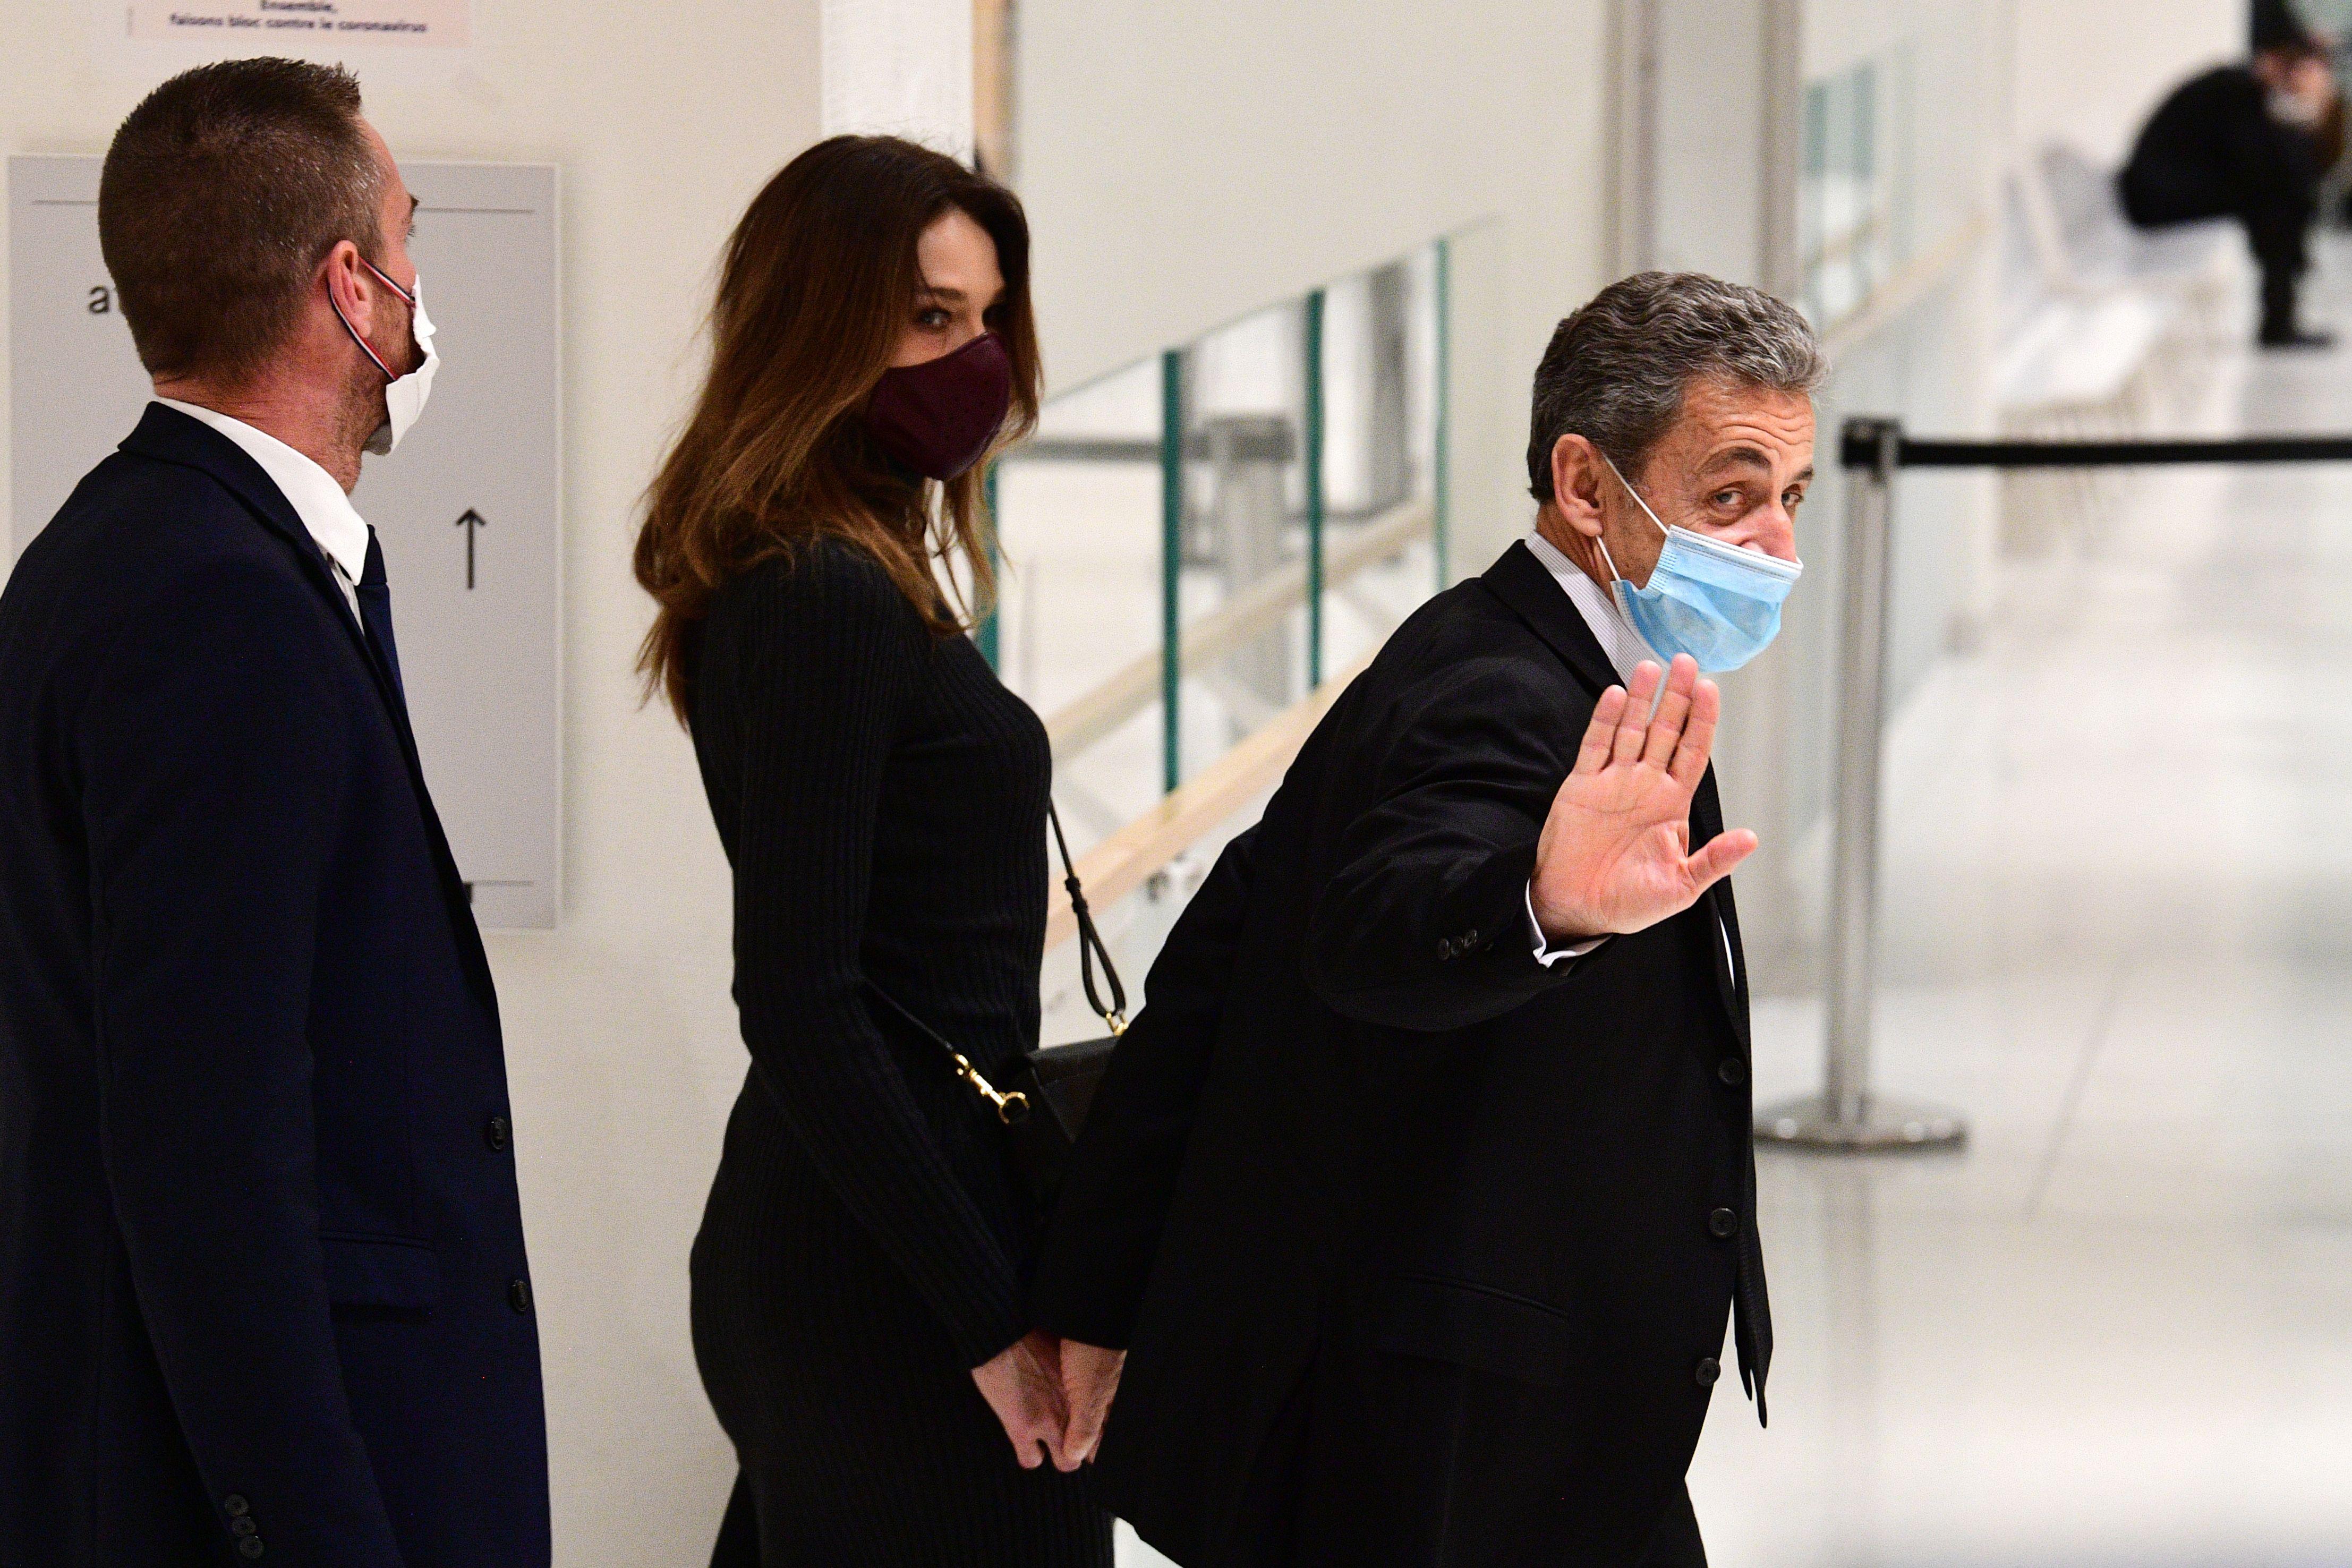 Sarkozy waves to the camera with one hand and holds his wife's hand with the other as they walk through a hallway